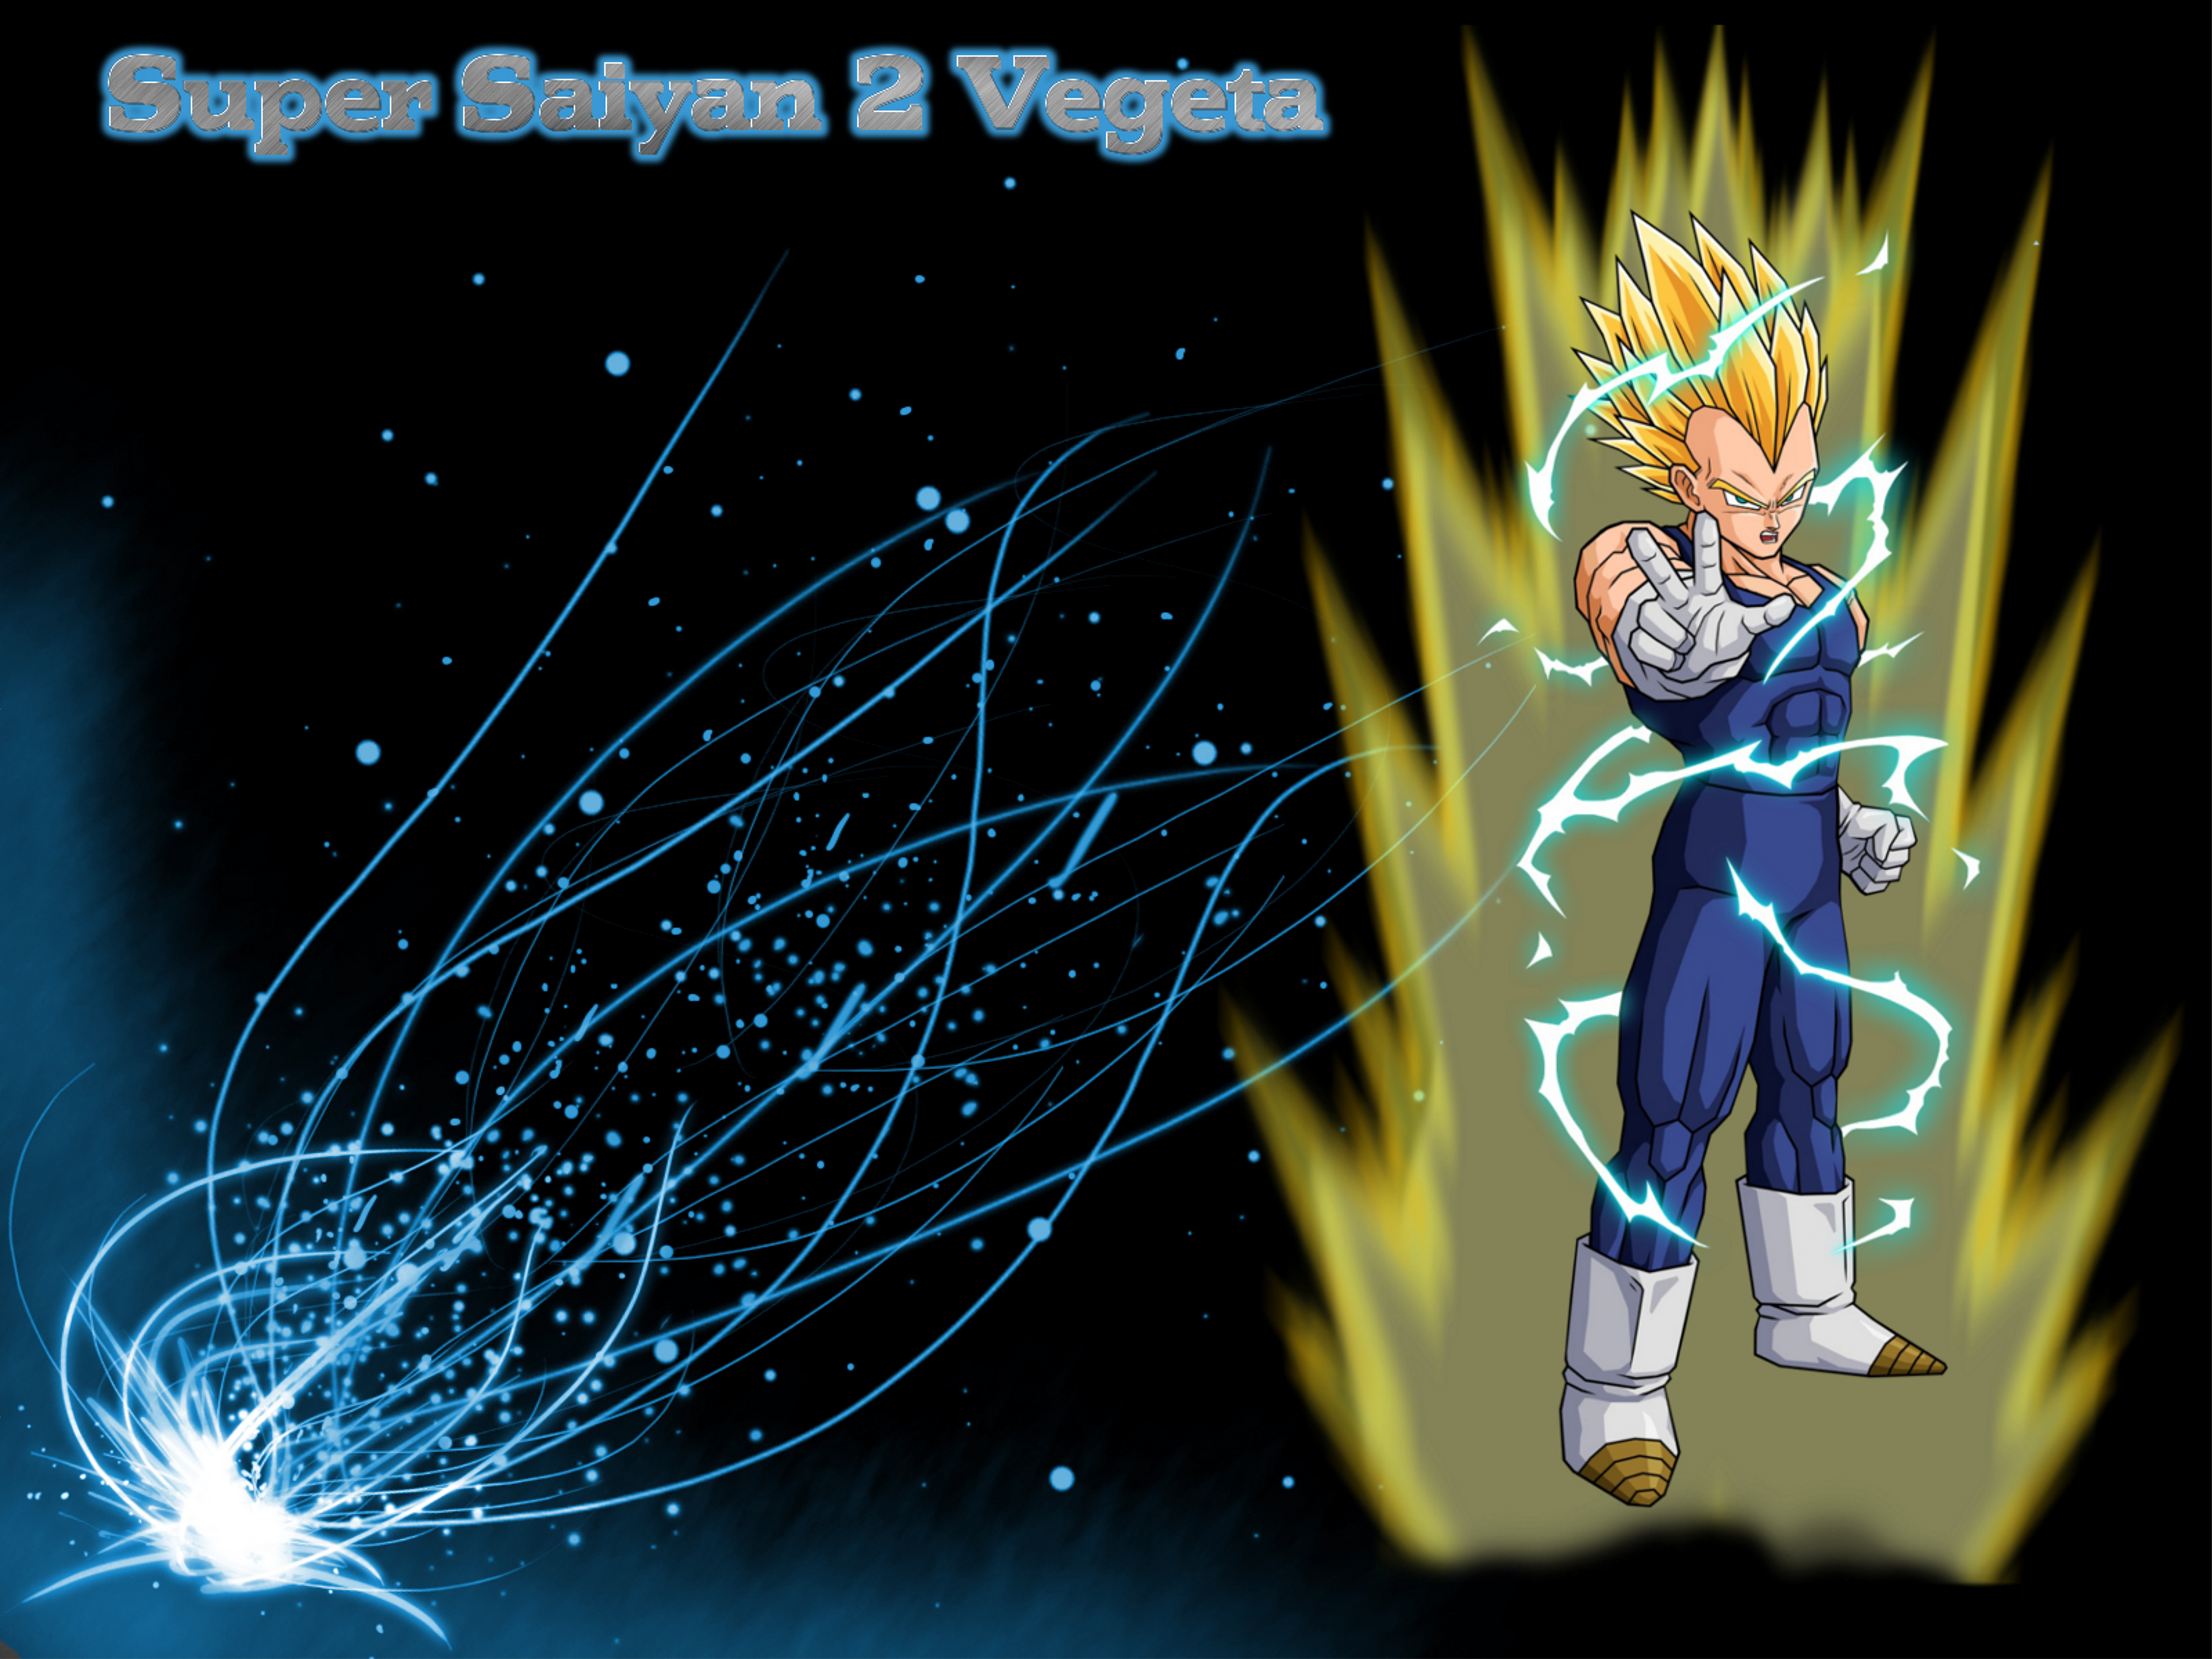 145+ Vegeta Wallpapers for iPhone and Android by Zachary Combs